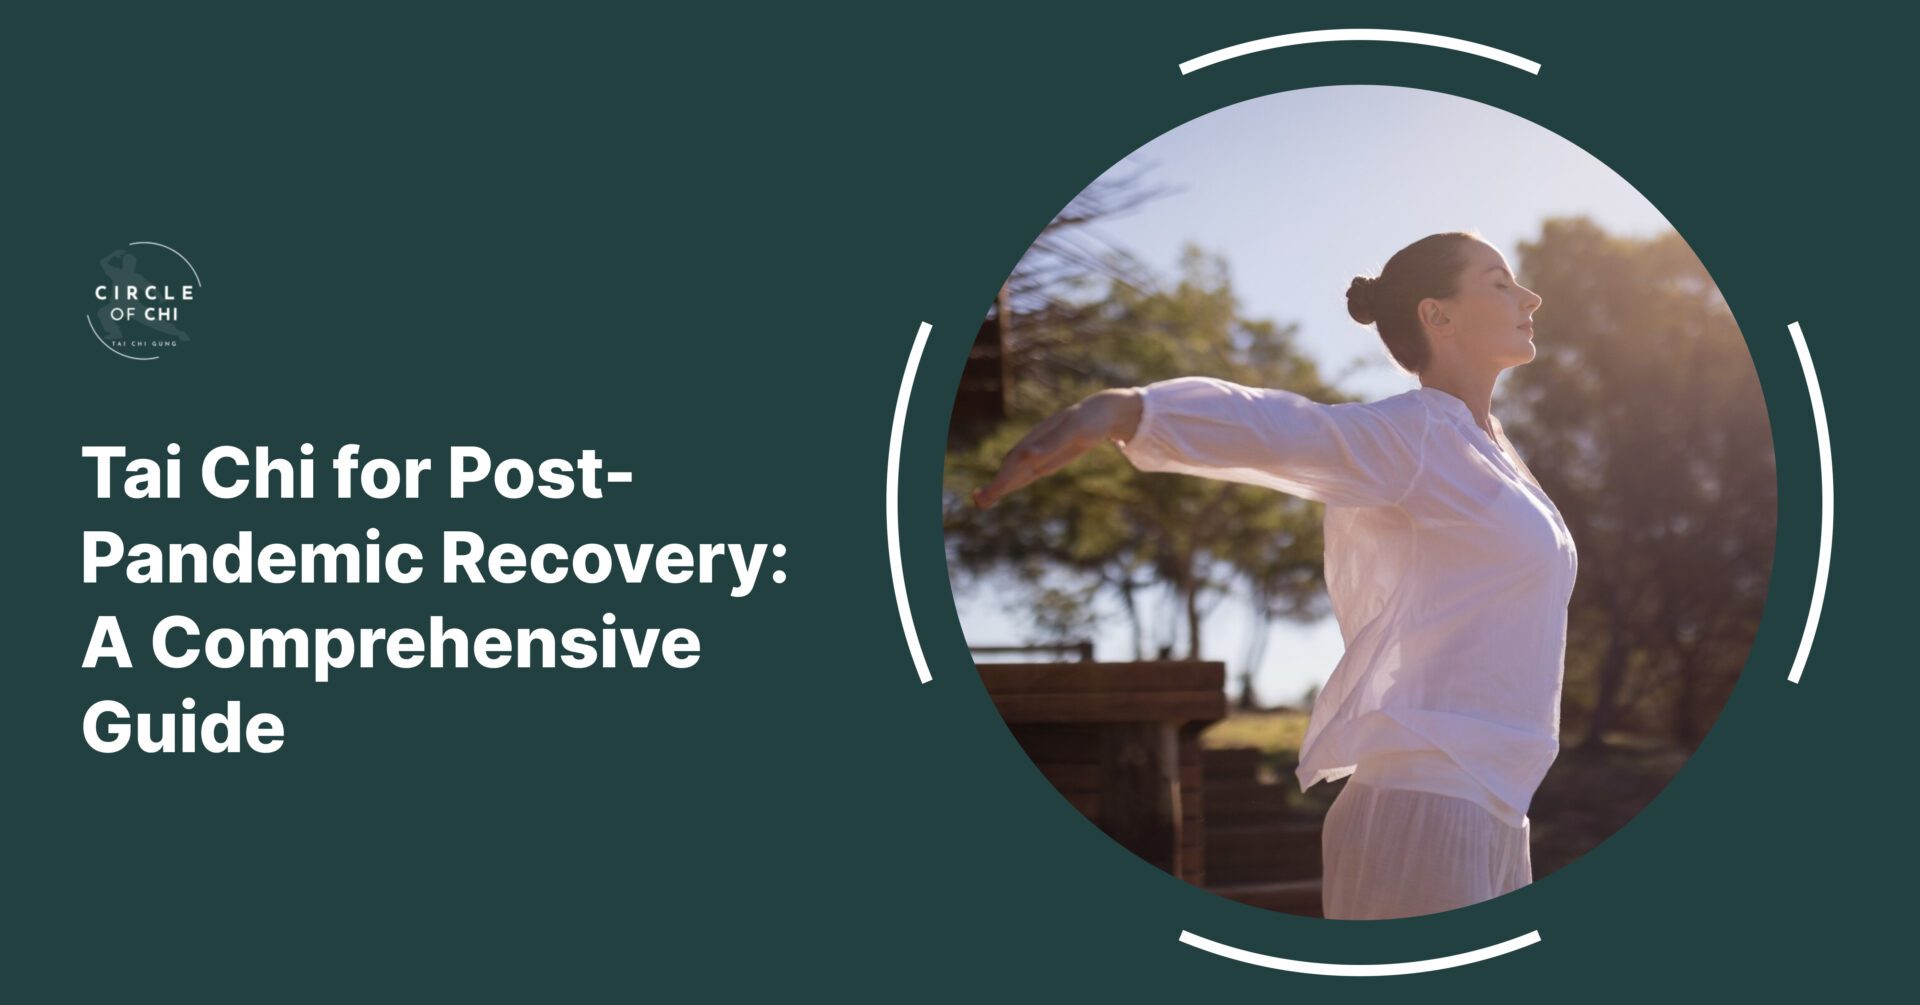 Tai Chi for Post-Pandemic Recovery: A Comprehensive Guide